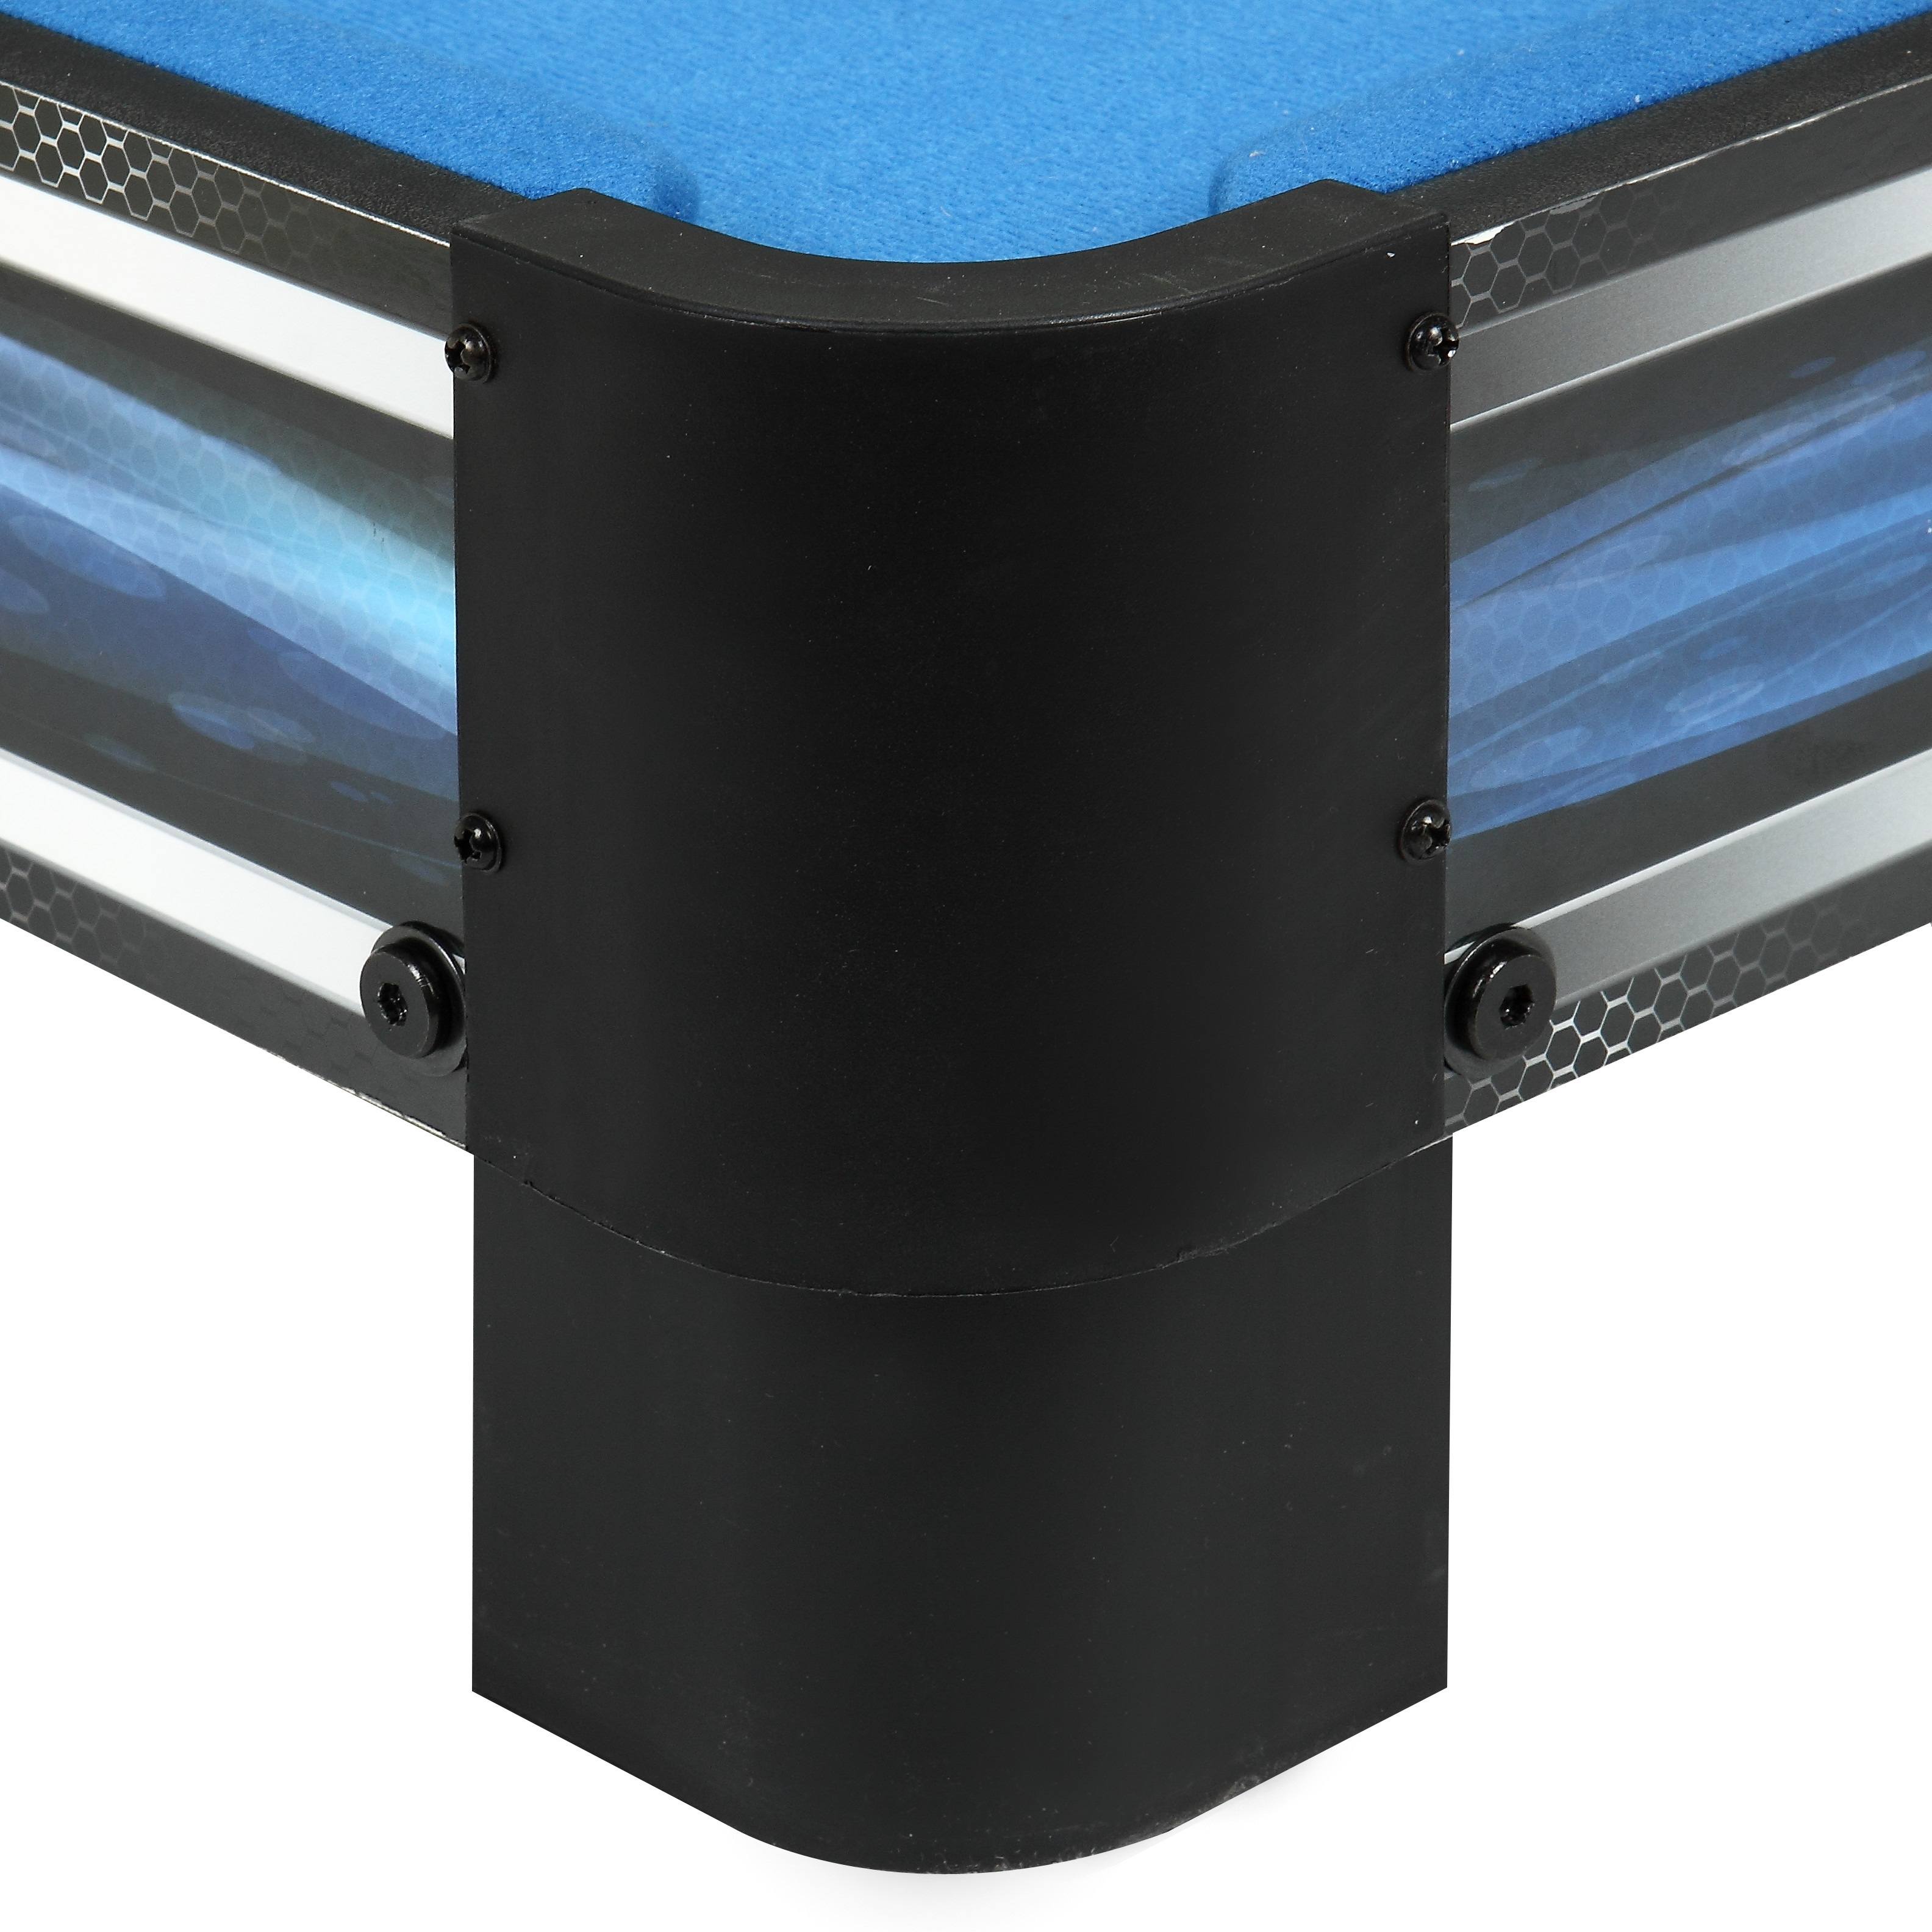 Hathaway Breakout Tabletop Pool Table, 40 In. Blue - image 3 of 7